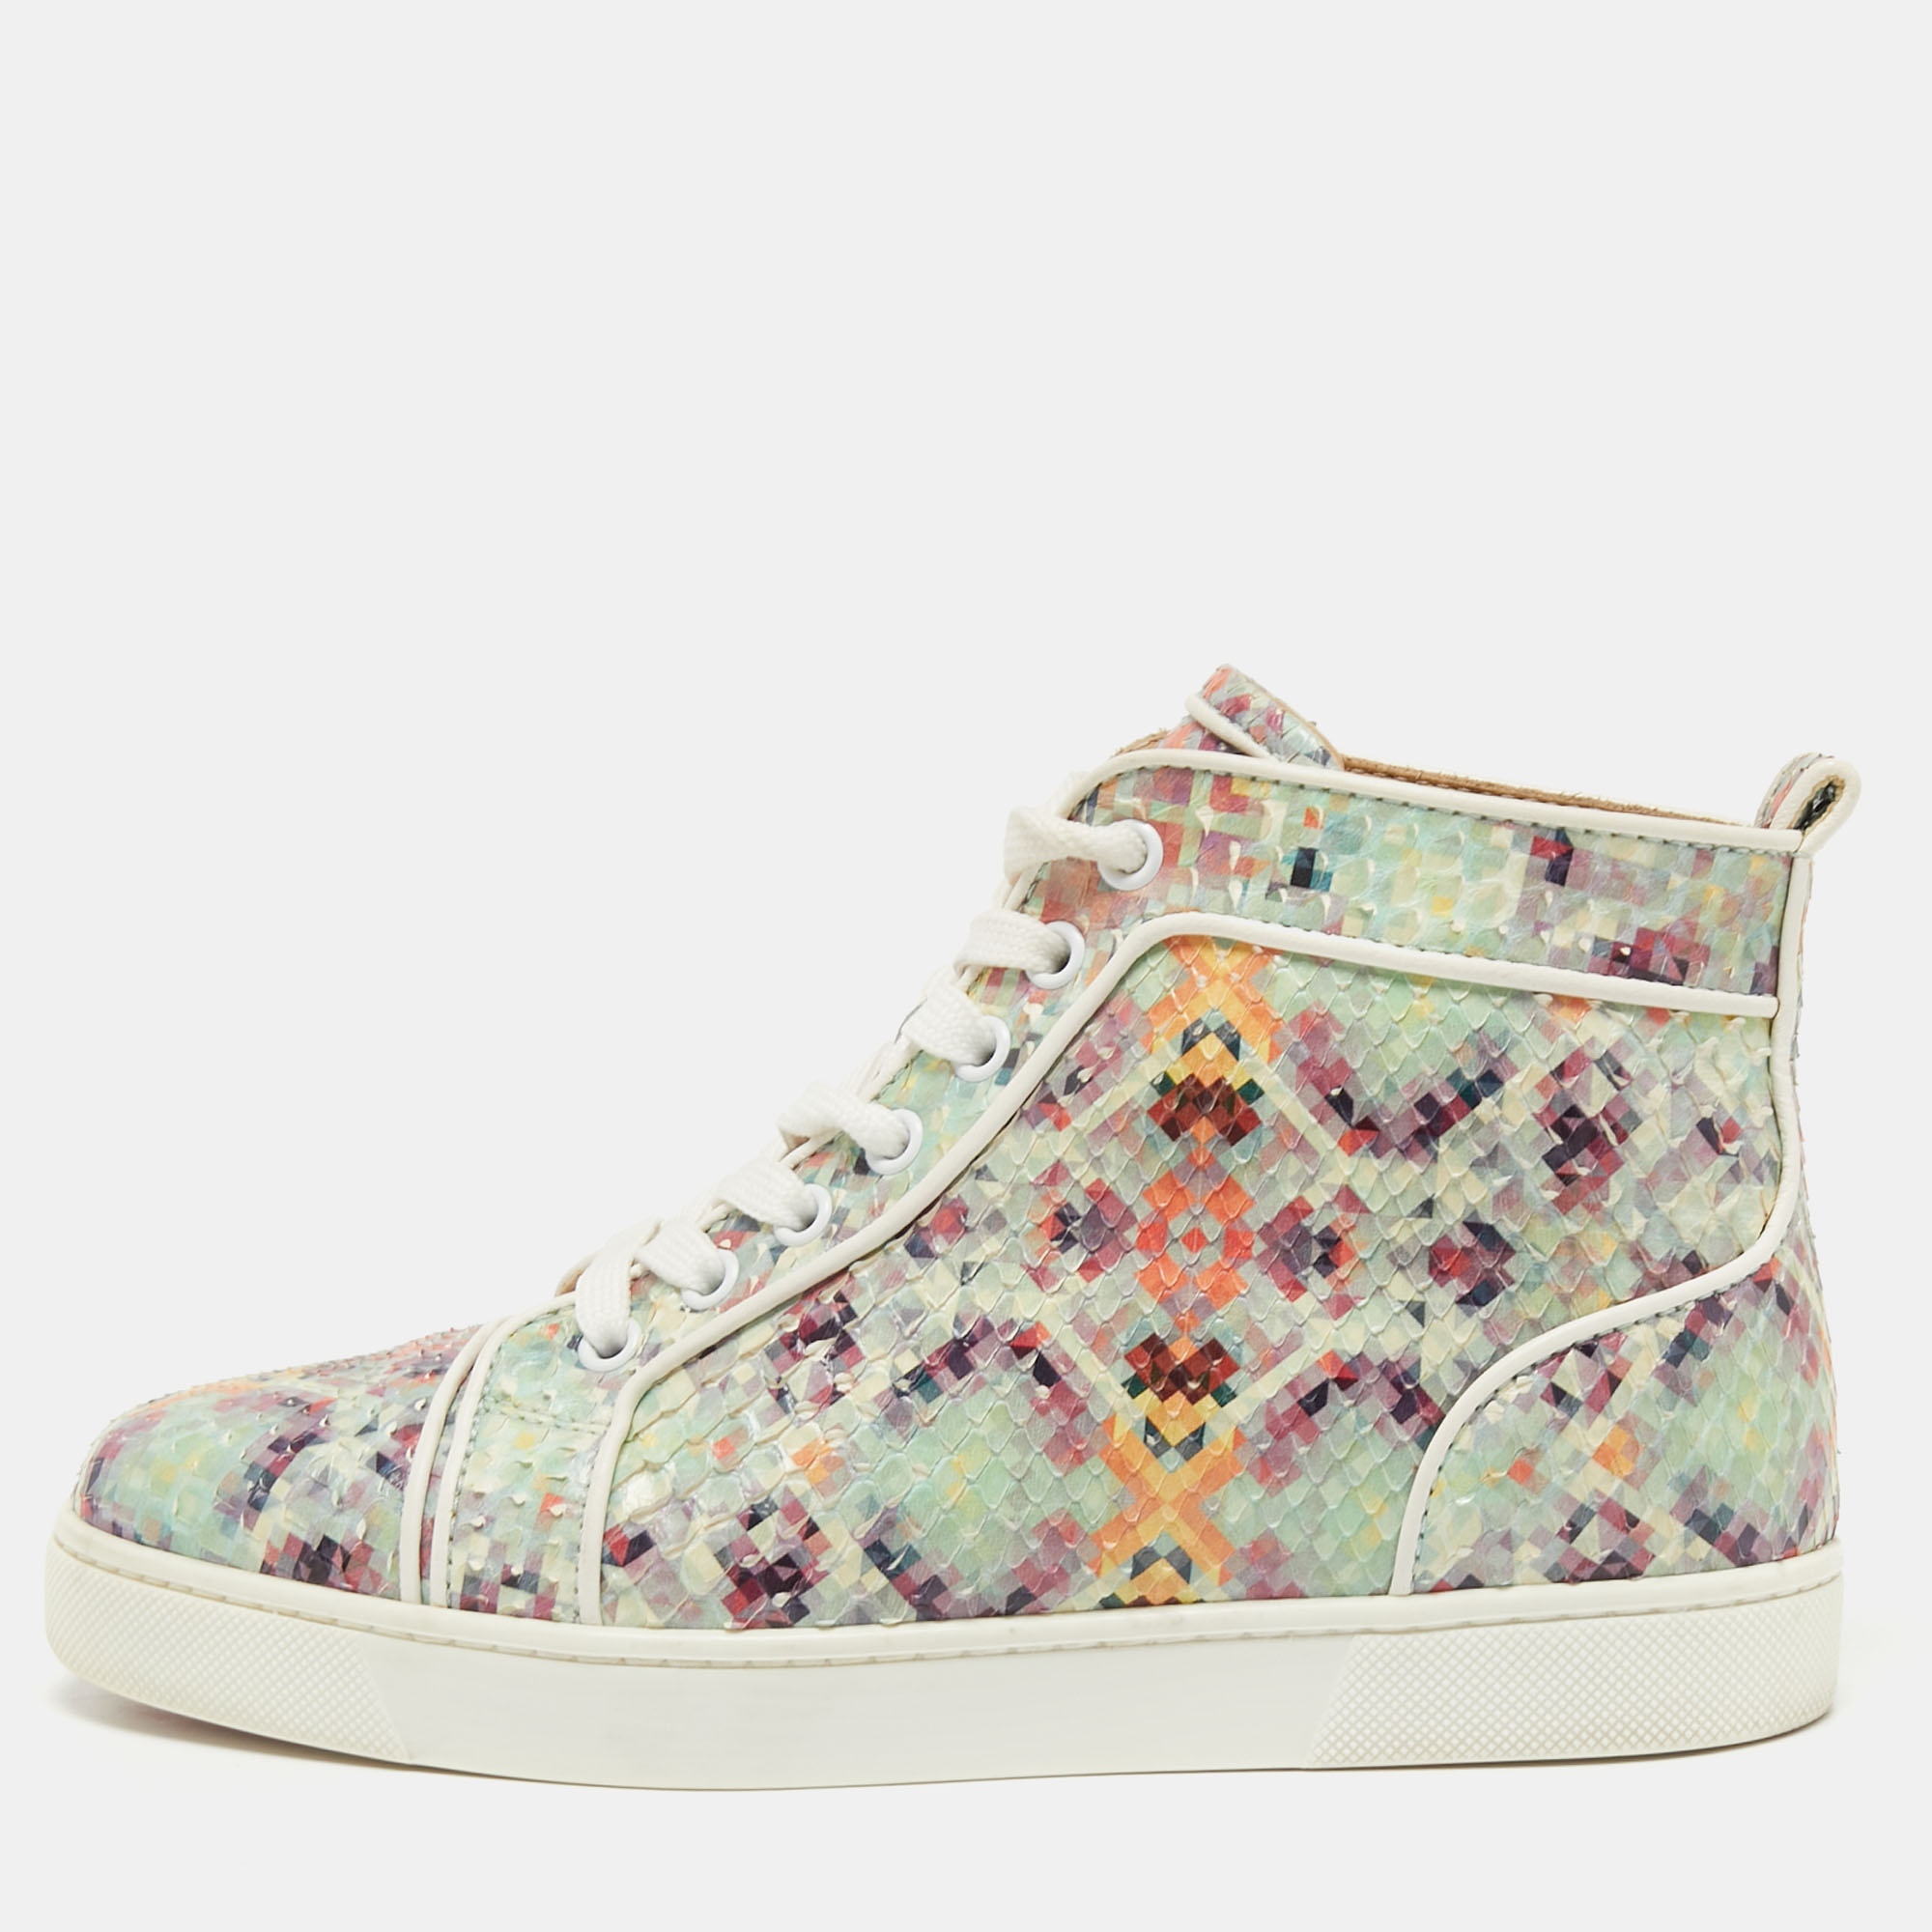 Pre-owned Christian Louboutin Multicolor Printed Python Louis Orlato High Top Sneakers Size 37